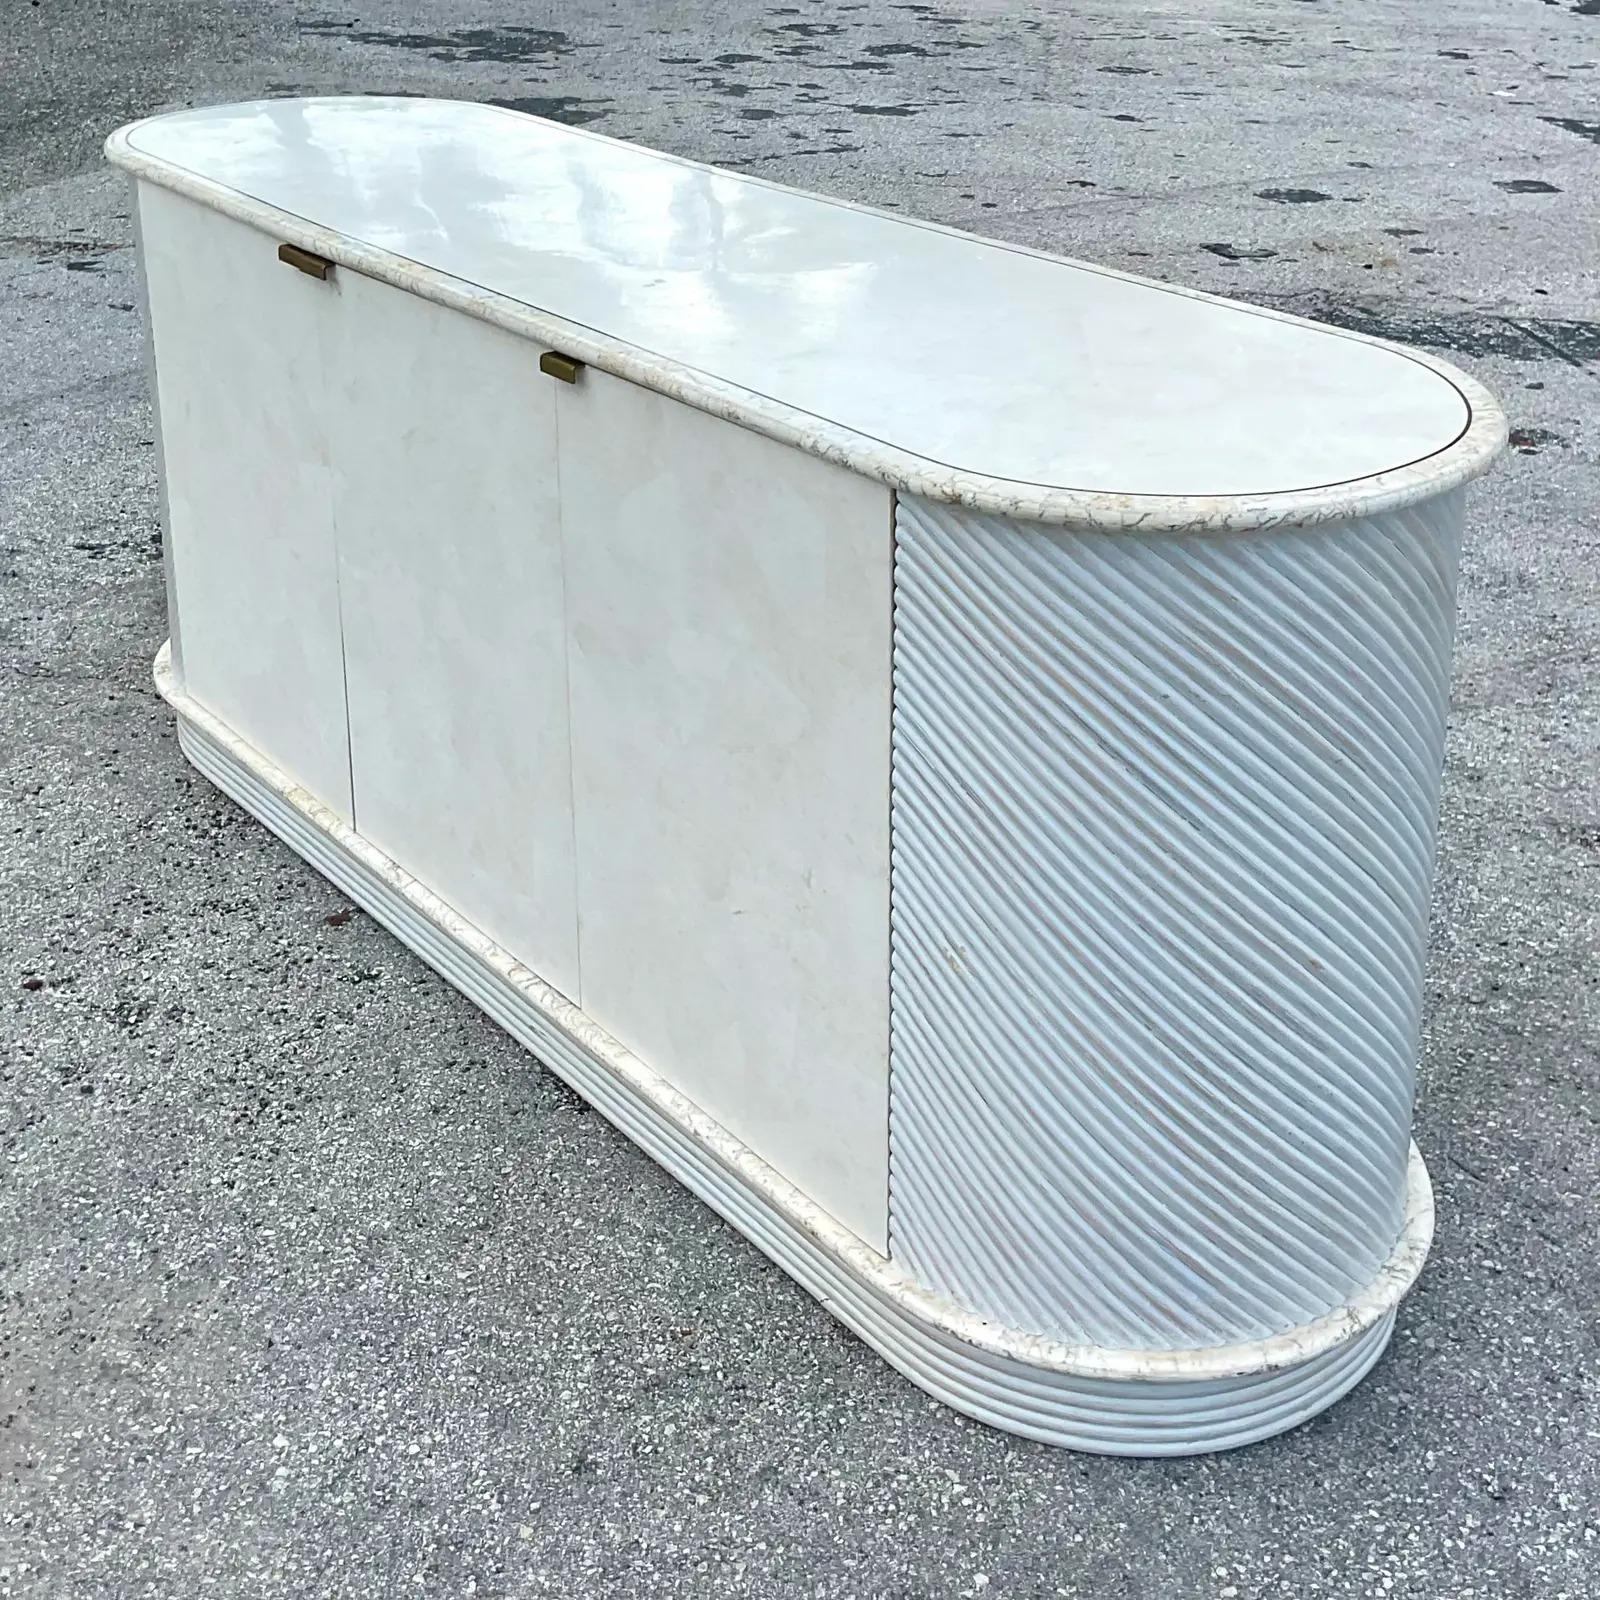 Fantastic vintage Coastal credenza. A chic design by the iconic Casa Bique group. Tessellated stone top and doors with cerused pretzel rattan ends. A real showstopper. Acquired from a Palm Beach estate.